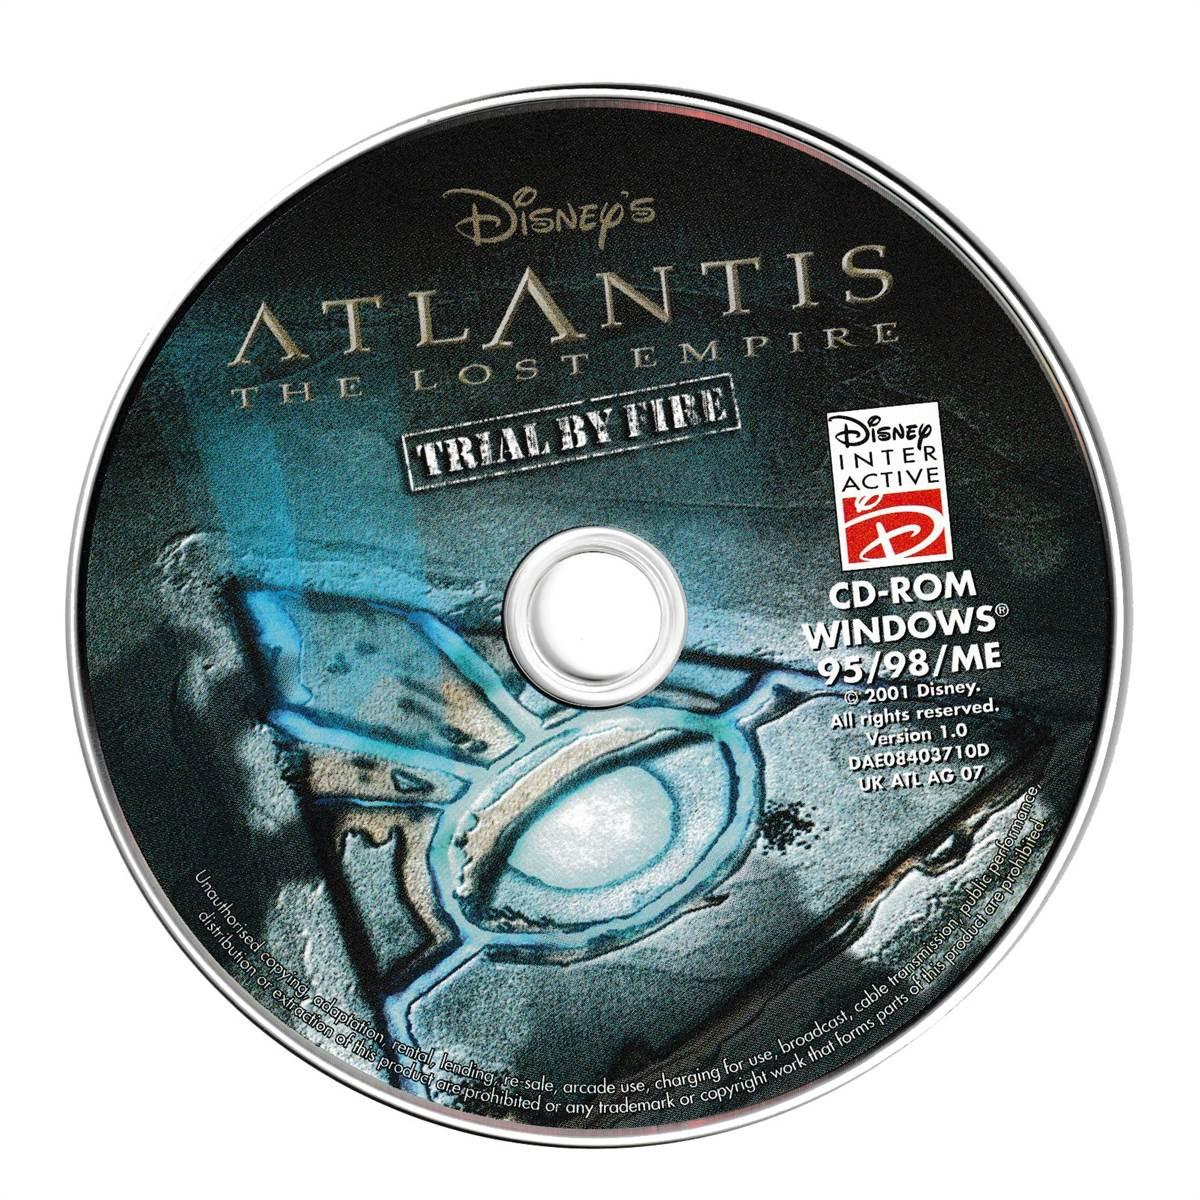 Atlantis The Lost Empire - Trial By Fire - Classic Windows PC Game